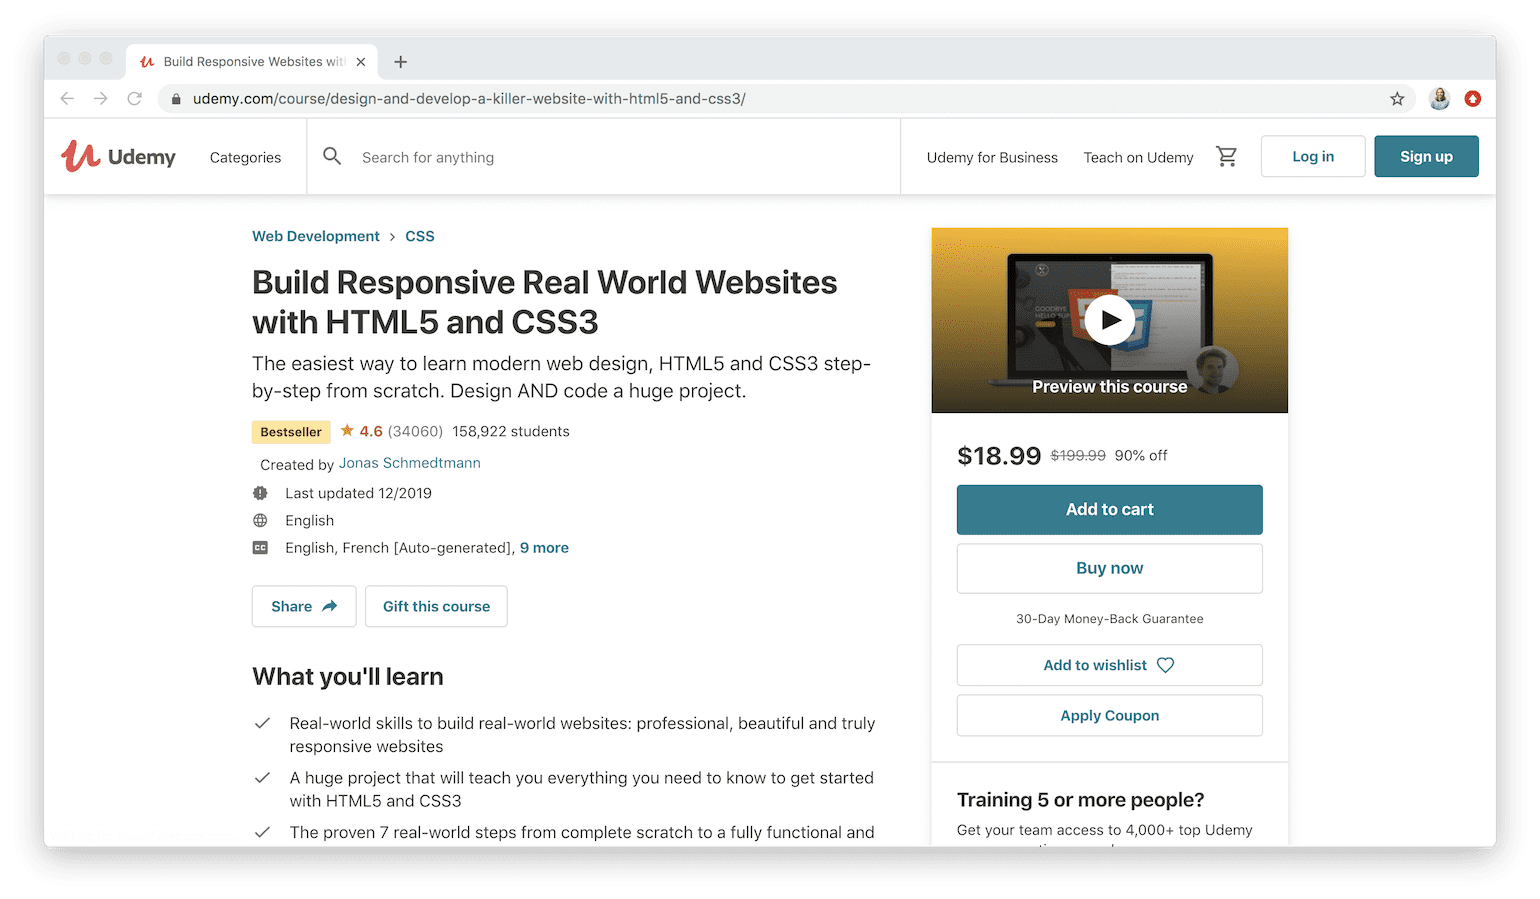 Build Responsive Real-World Websites with HTML5 and CSS3 on Udemy